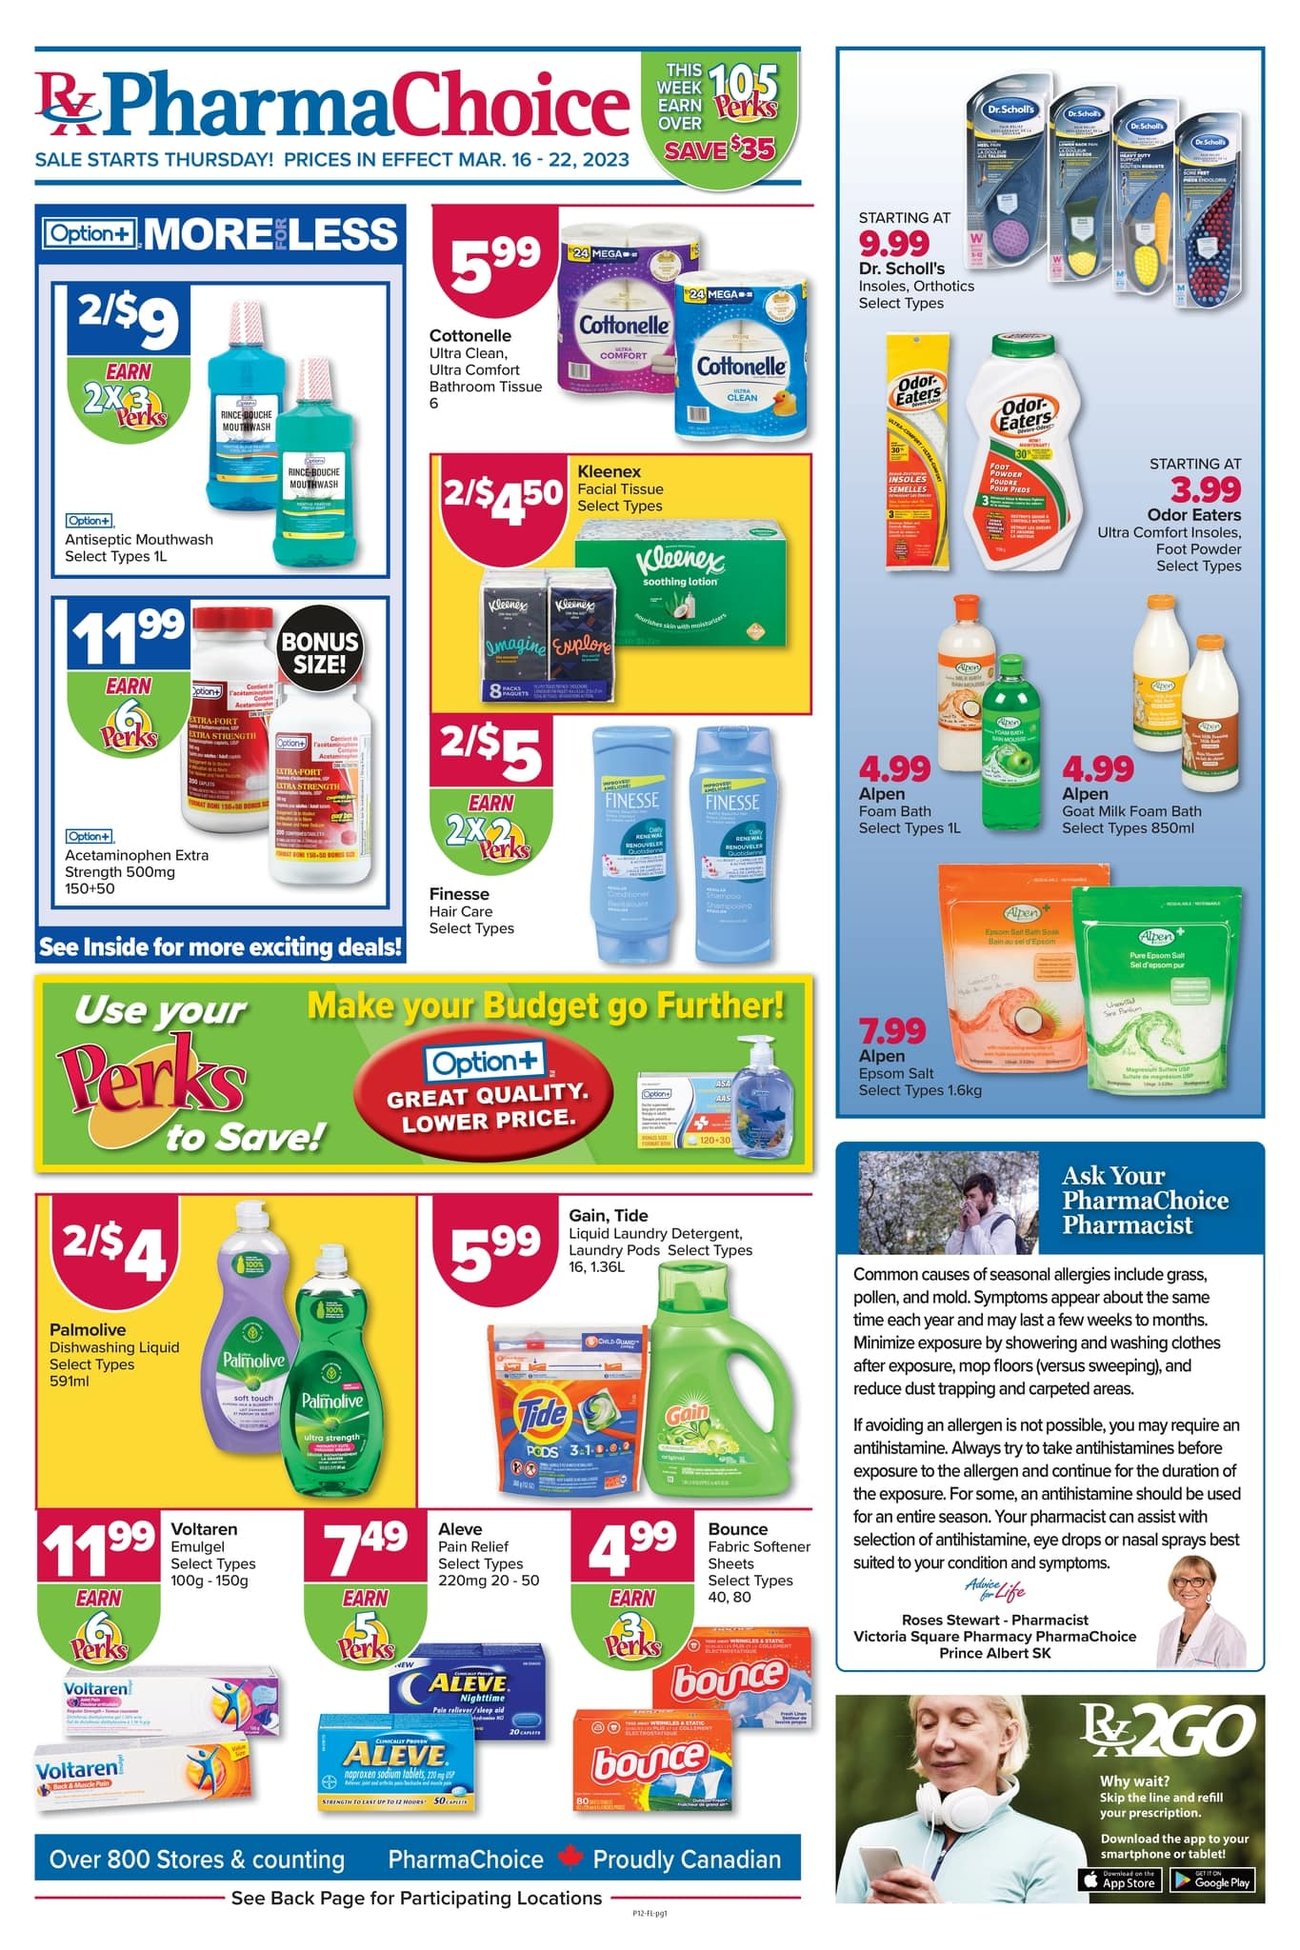 PharmaChoice - Weekly Flyer Specials - Page 1